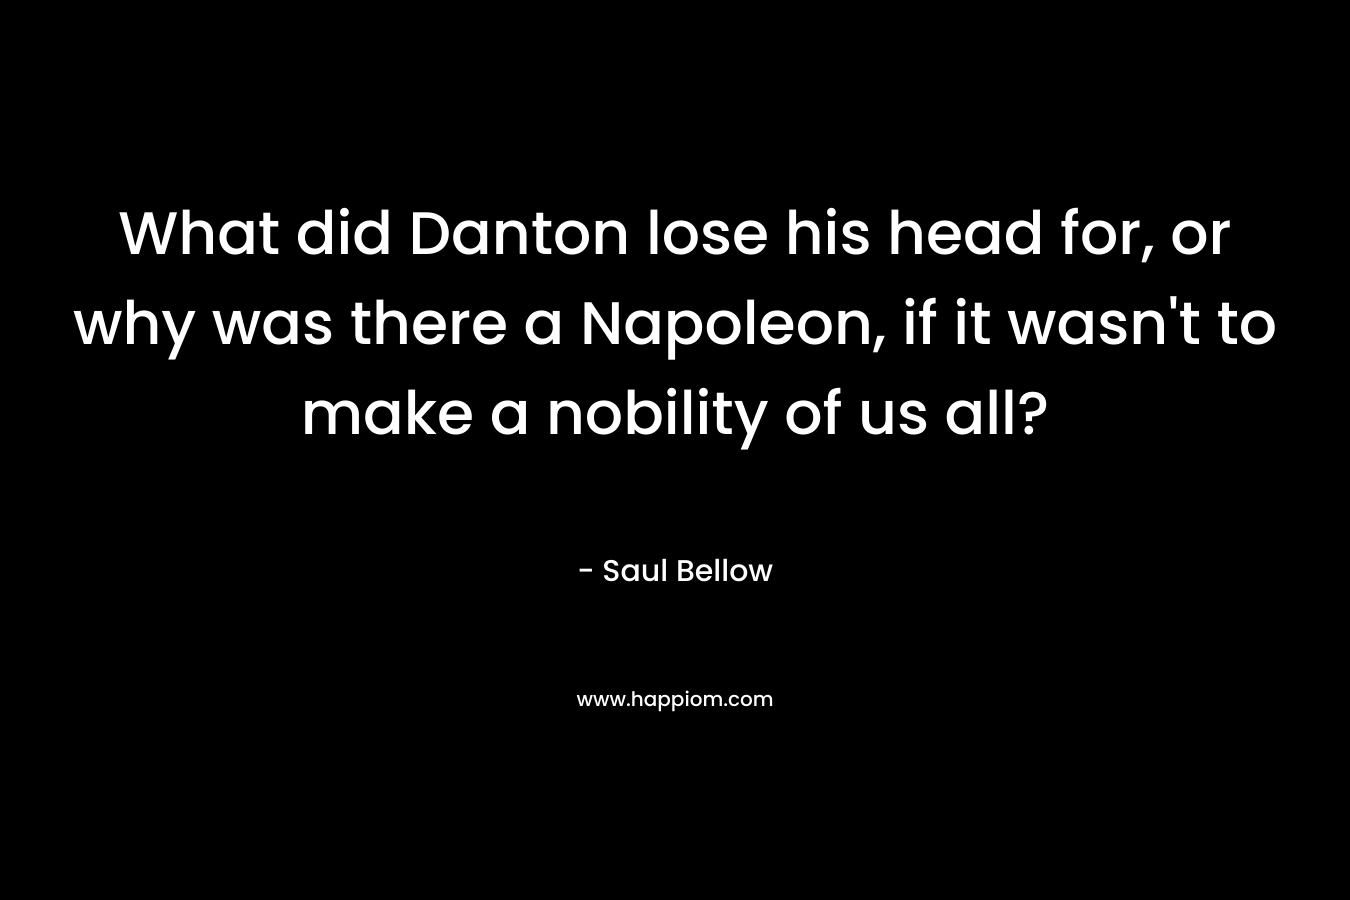 What did Danton lose his head for, or why was there a Napoleon, if it wasn’t to make a nobility of us all? – Saul Bellow